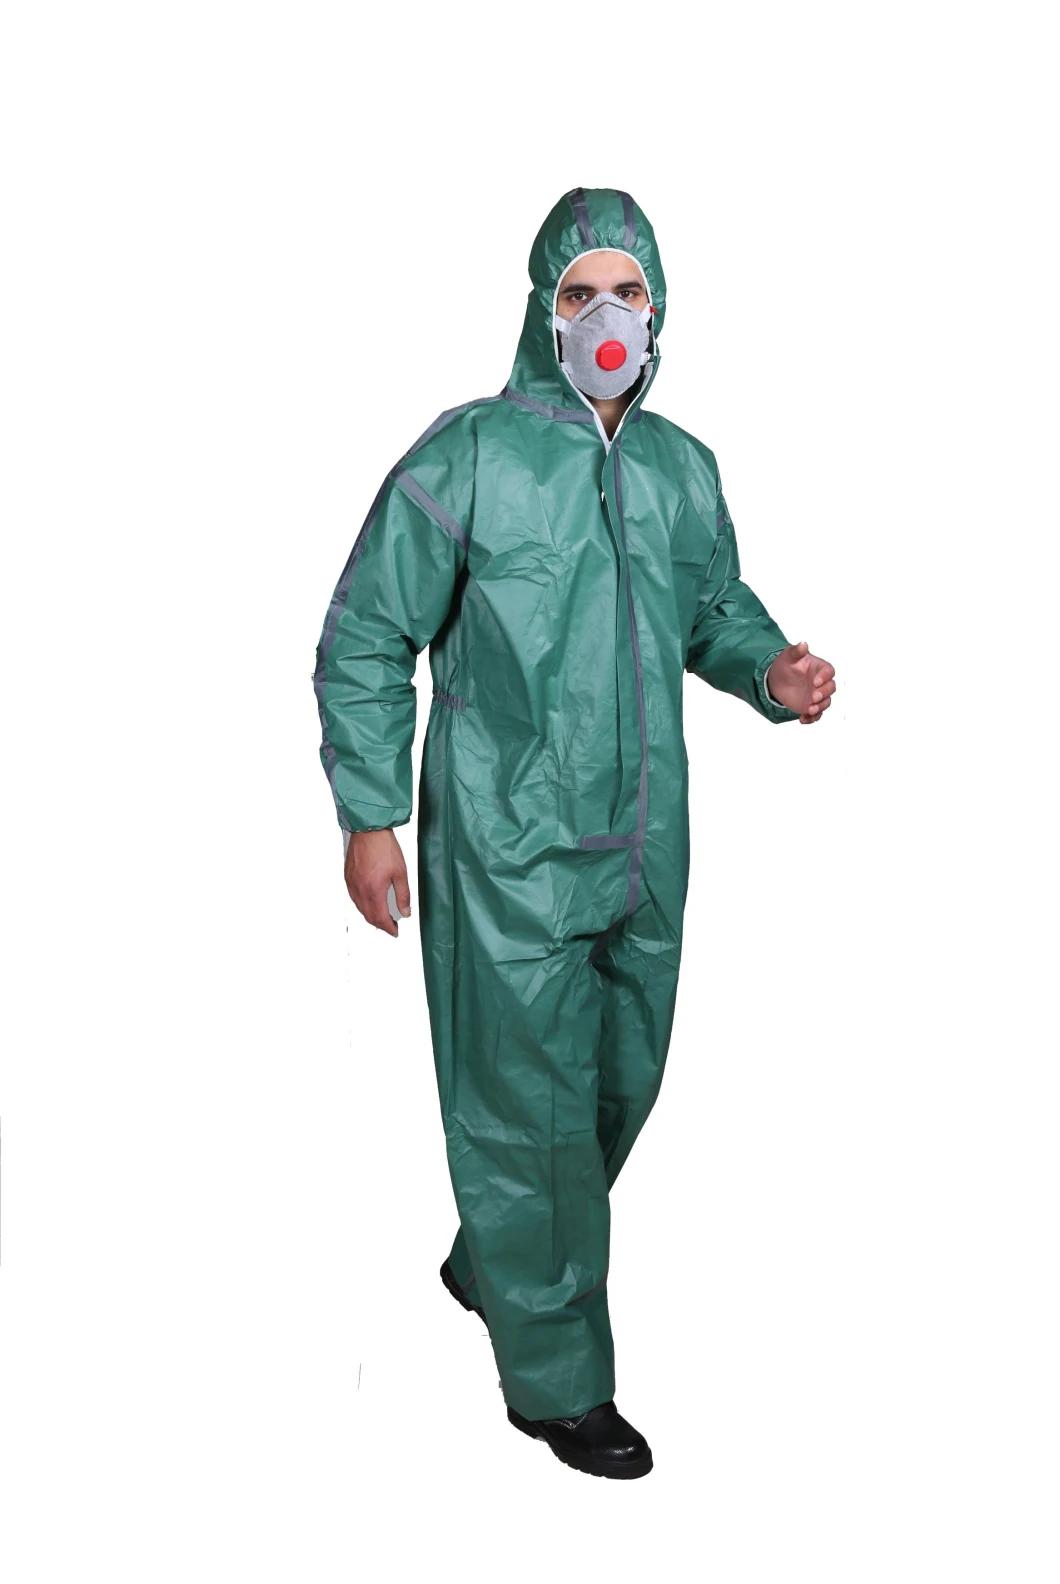 Anti-Virus PP/Non Woven /SMS Disposable Safety Suit Protective Clothing